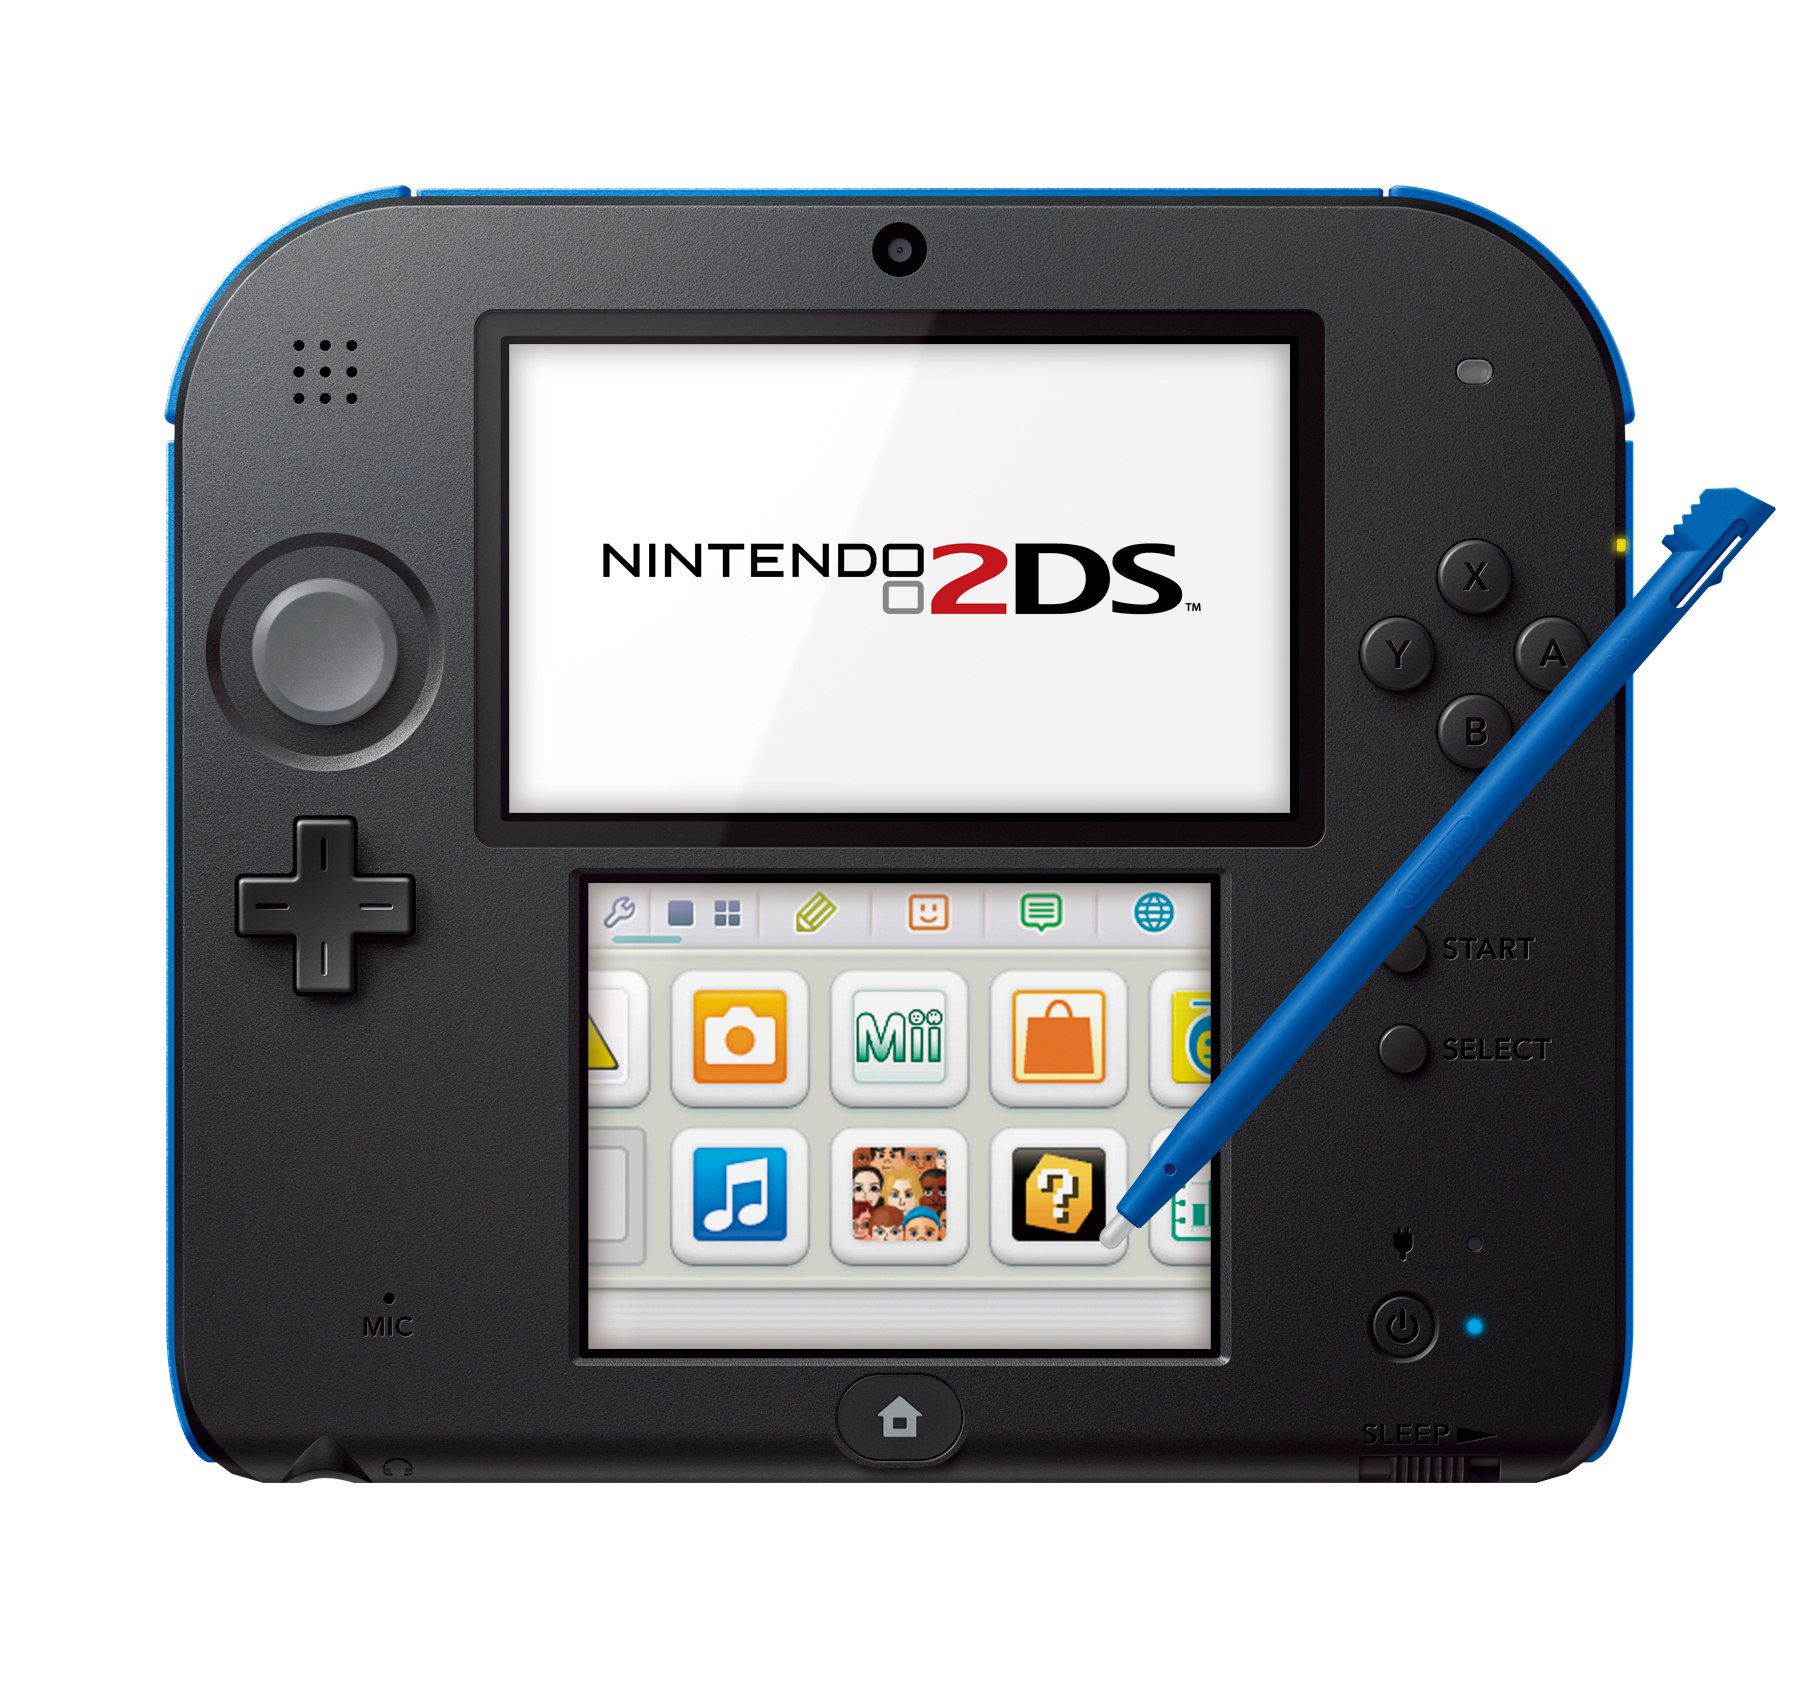 Should You Buy the Nintendo 3DS or the Nintendo 2DS?